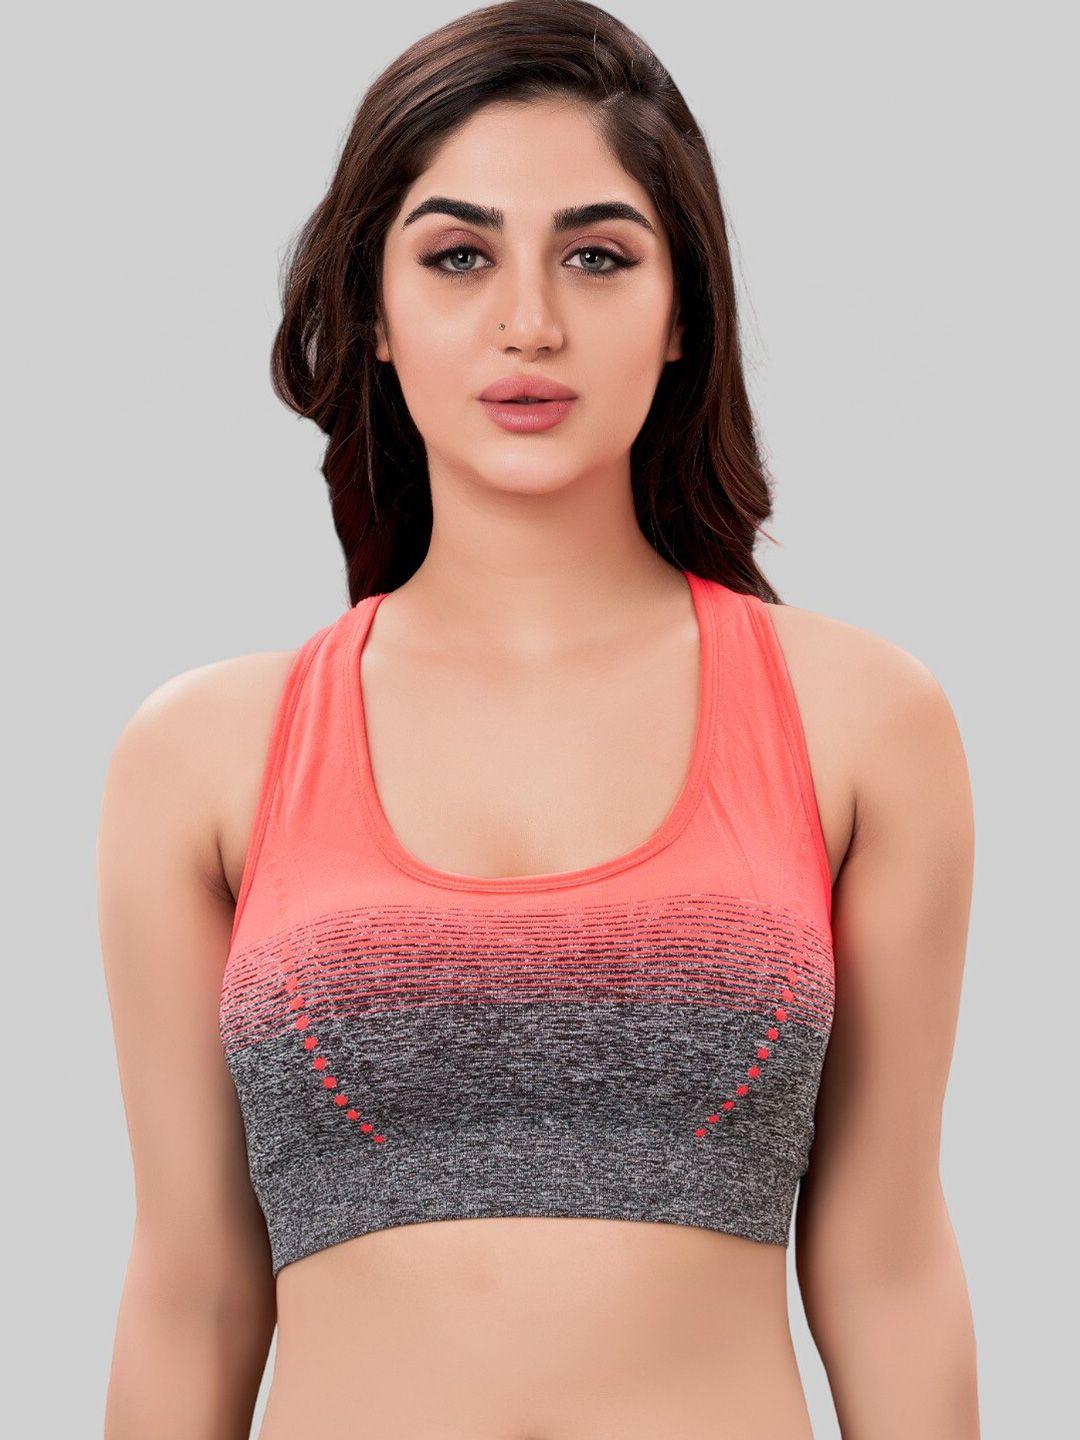 plumbury-printed-full-coverage-removable-padded-rapid-dry-sports-bra-with-all-day-comfort